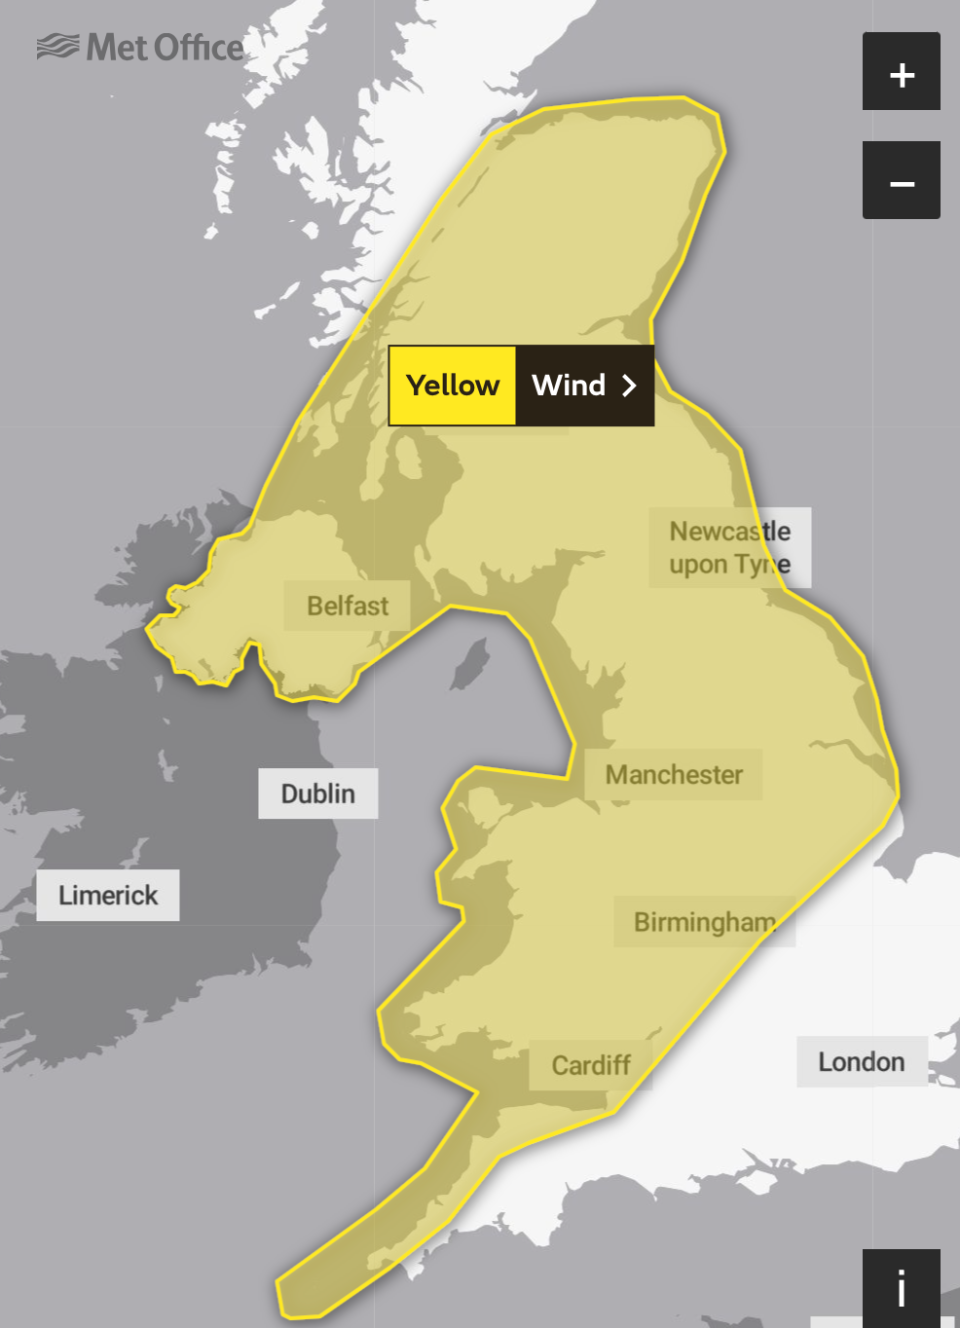 The Met Office has issued danger to life warnings as 80mph winds prepare to batter the UK (Met Office/screengrab)